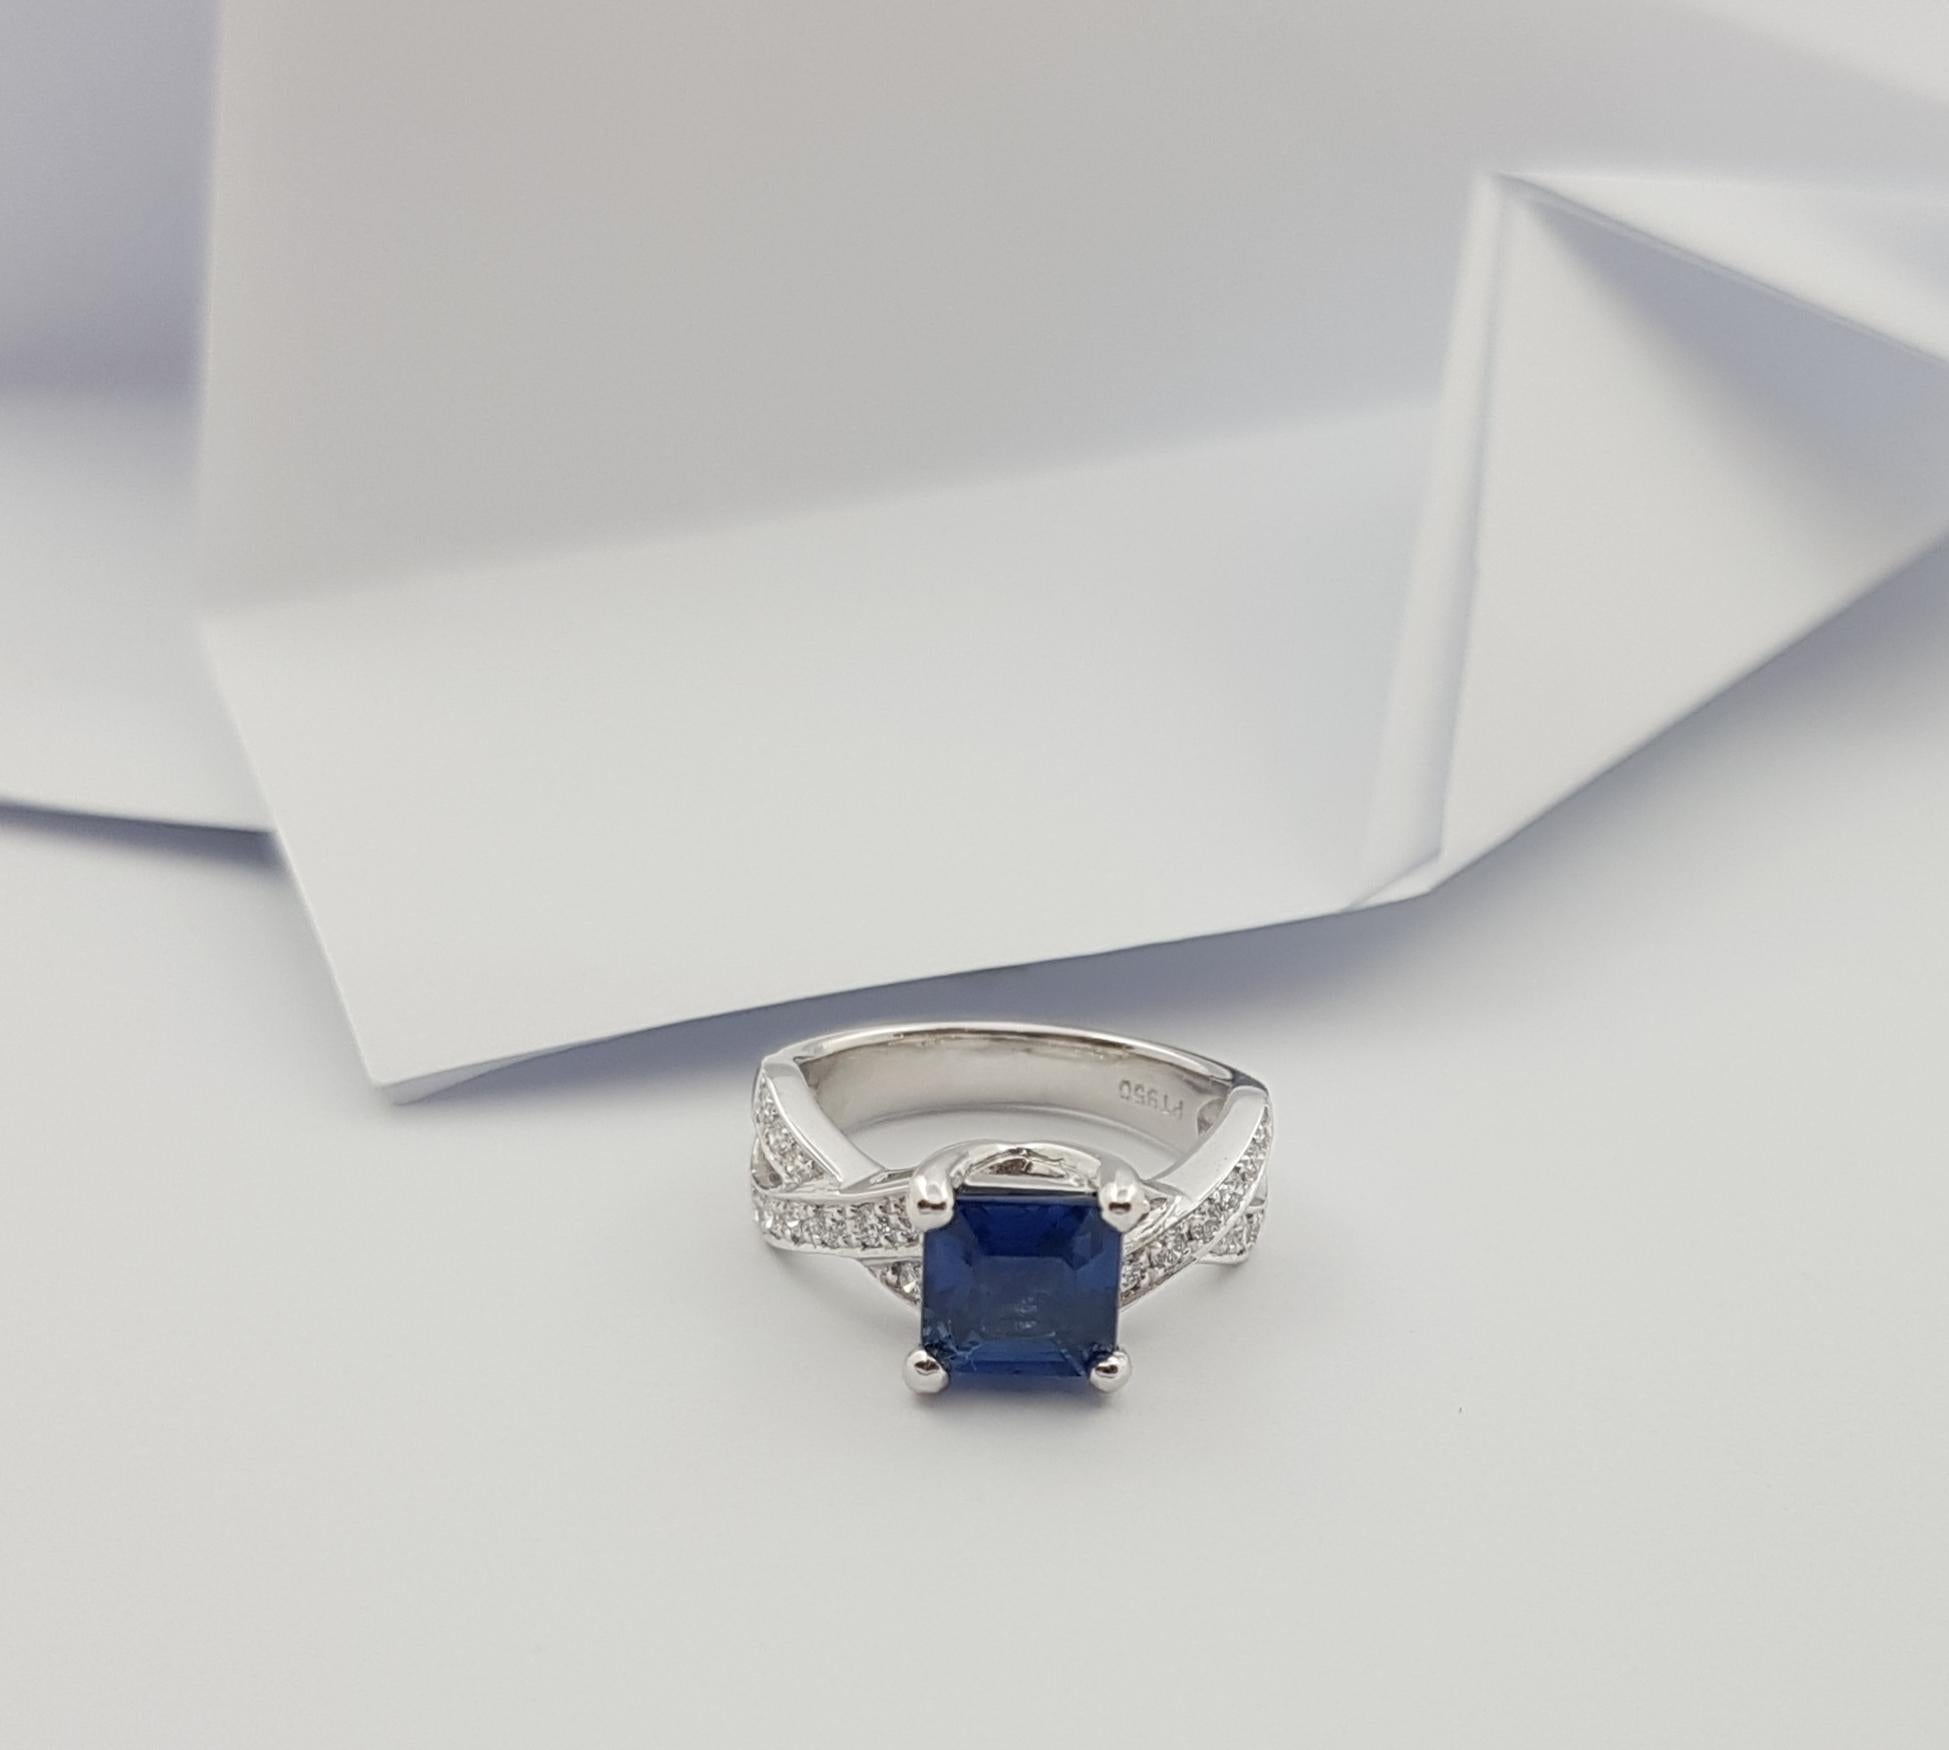 Certified Burmese Blue Sapphire with Diamond Ring Set in Platinum 950  For Sale 4